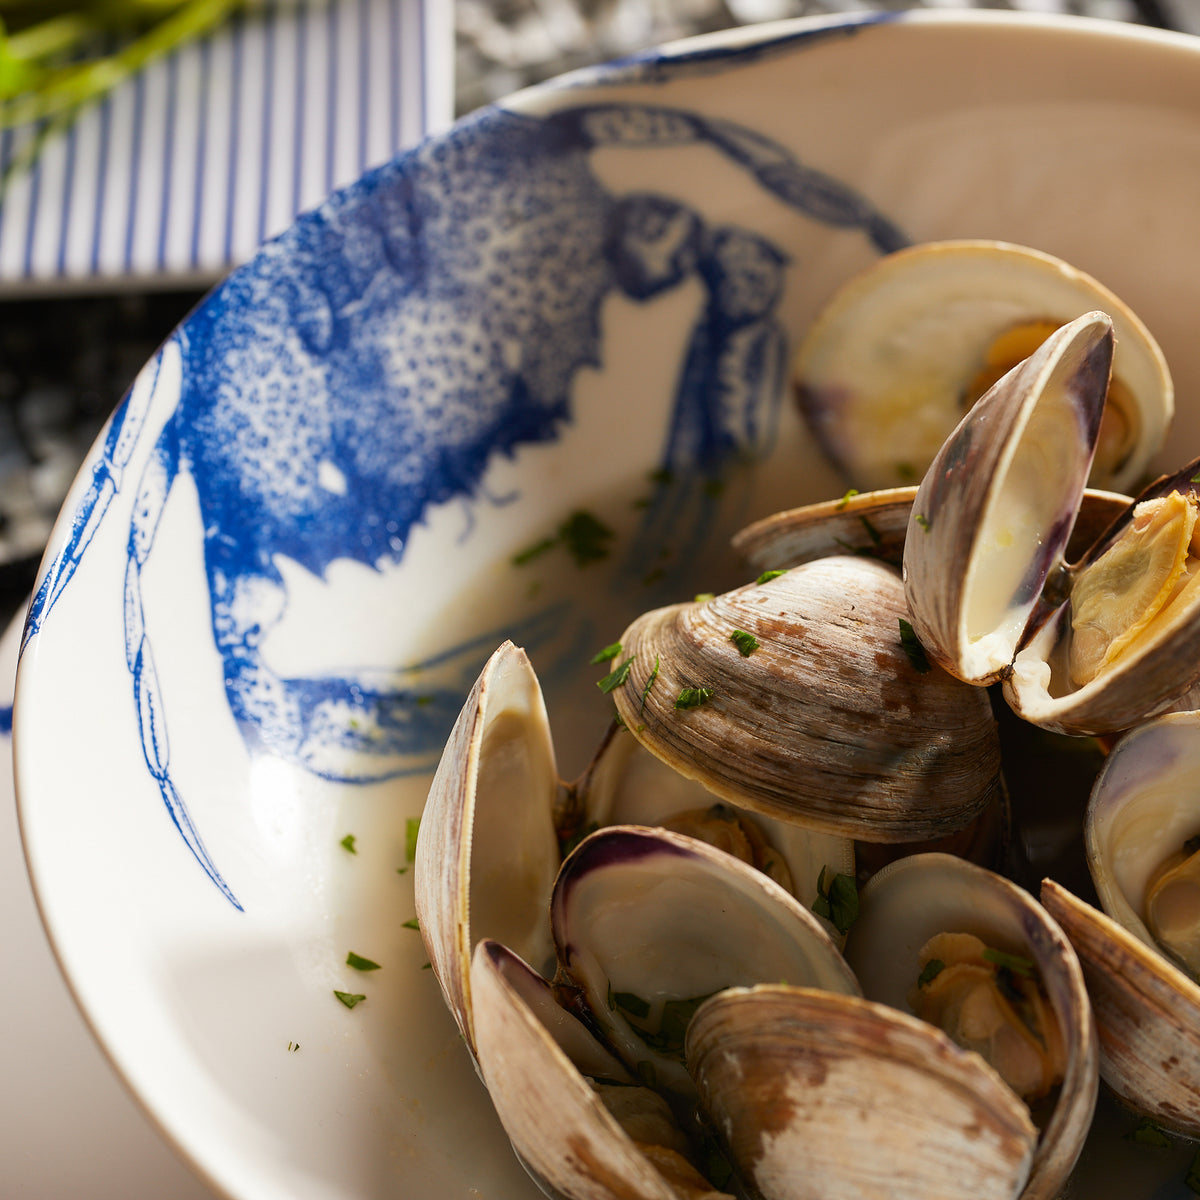 A close detail shot of a blue and white crab patterned generous soup bowl from Caskata holds steamed clams.